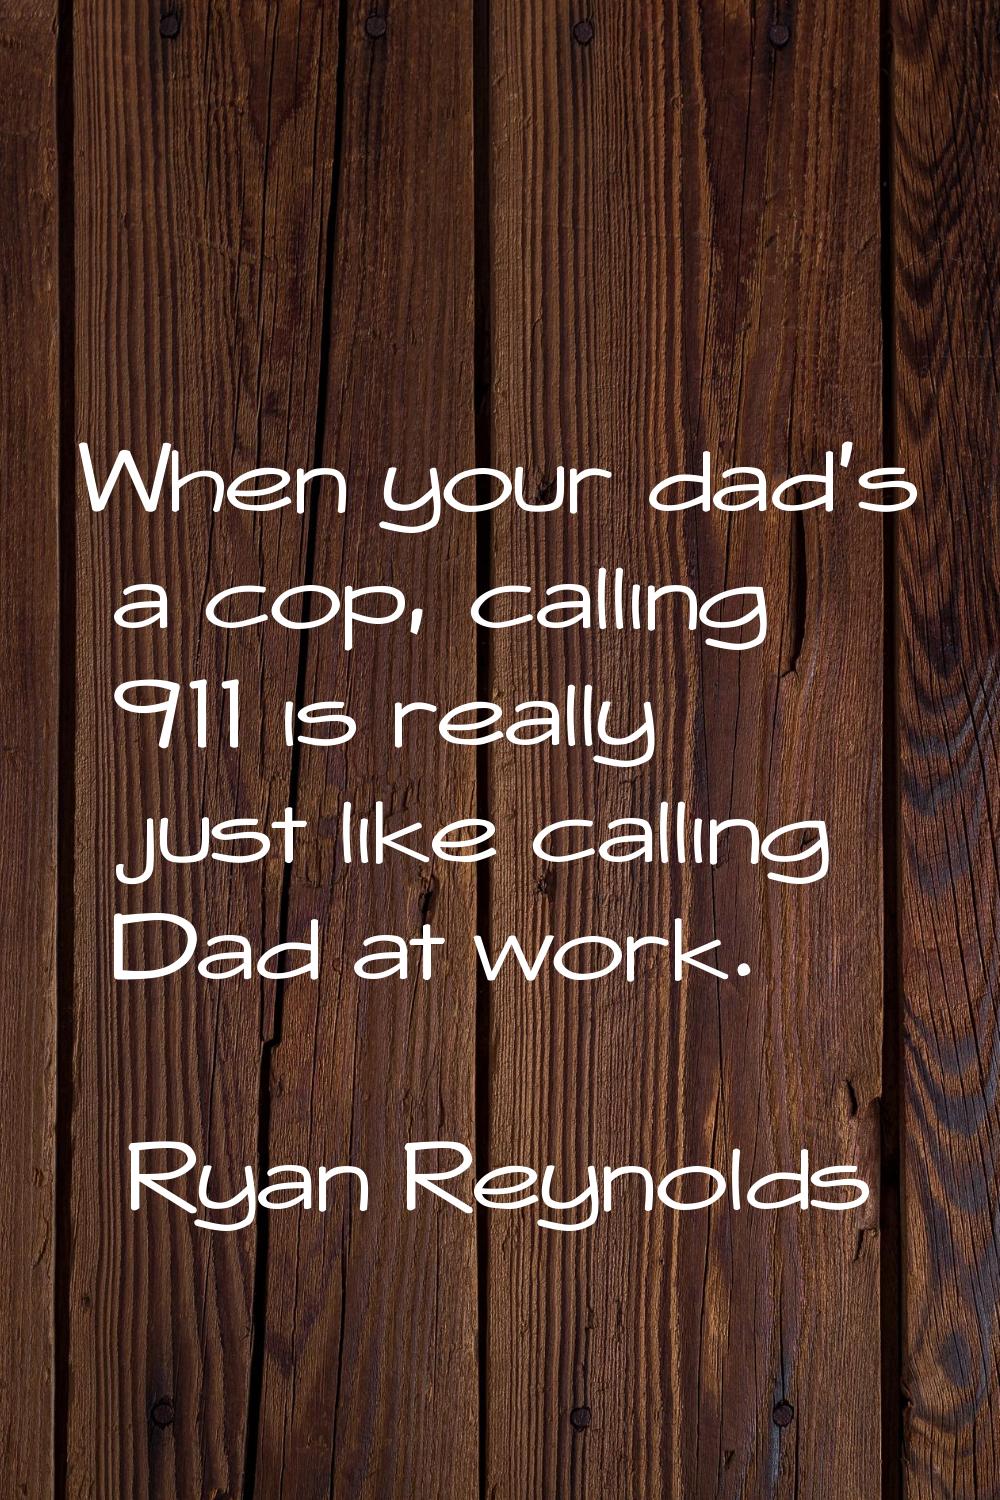 When your dad's a cop, calling 911 is really just like calling Dad at work.